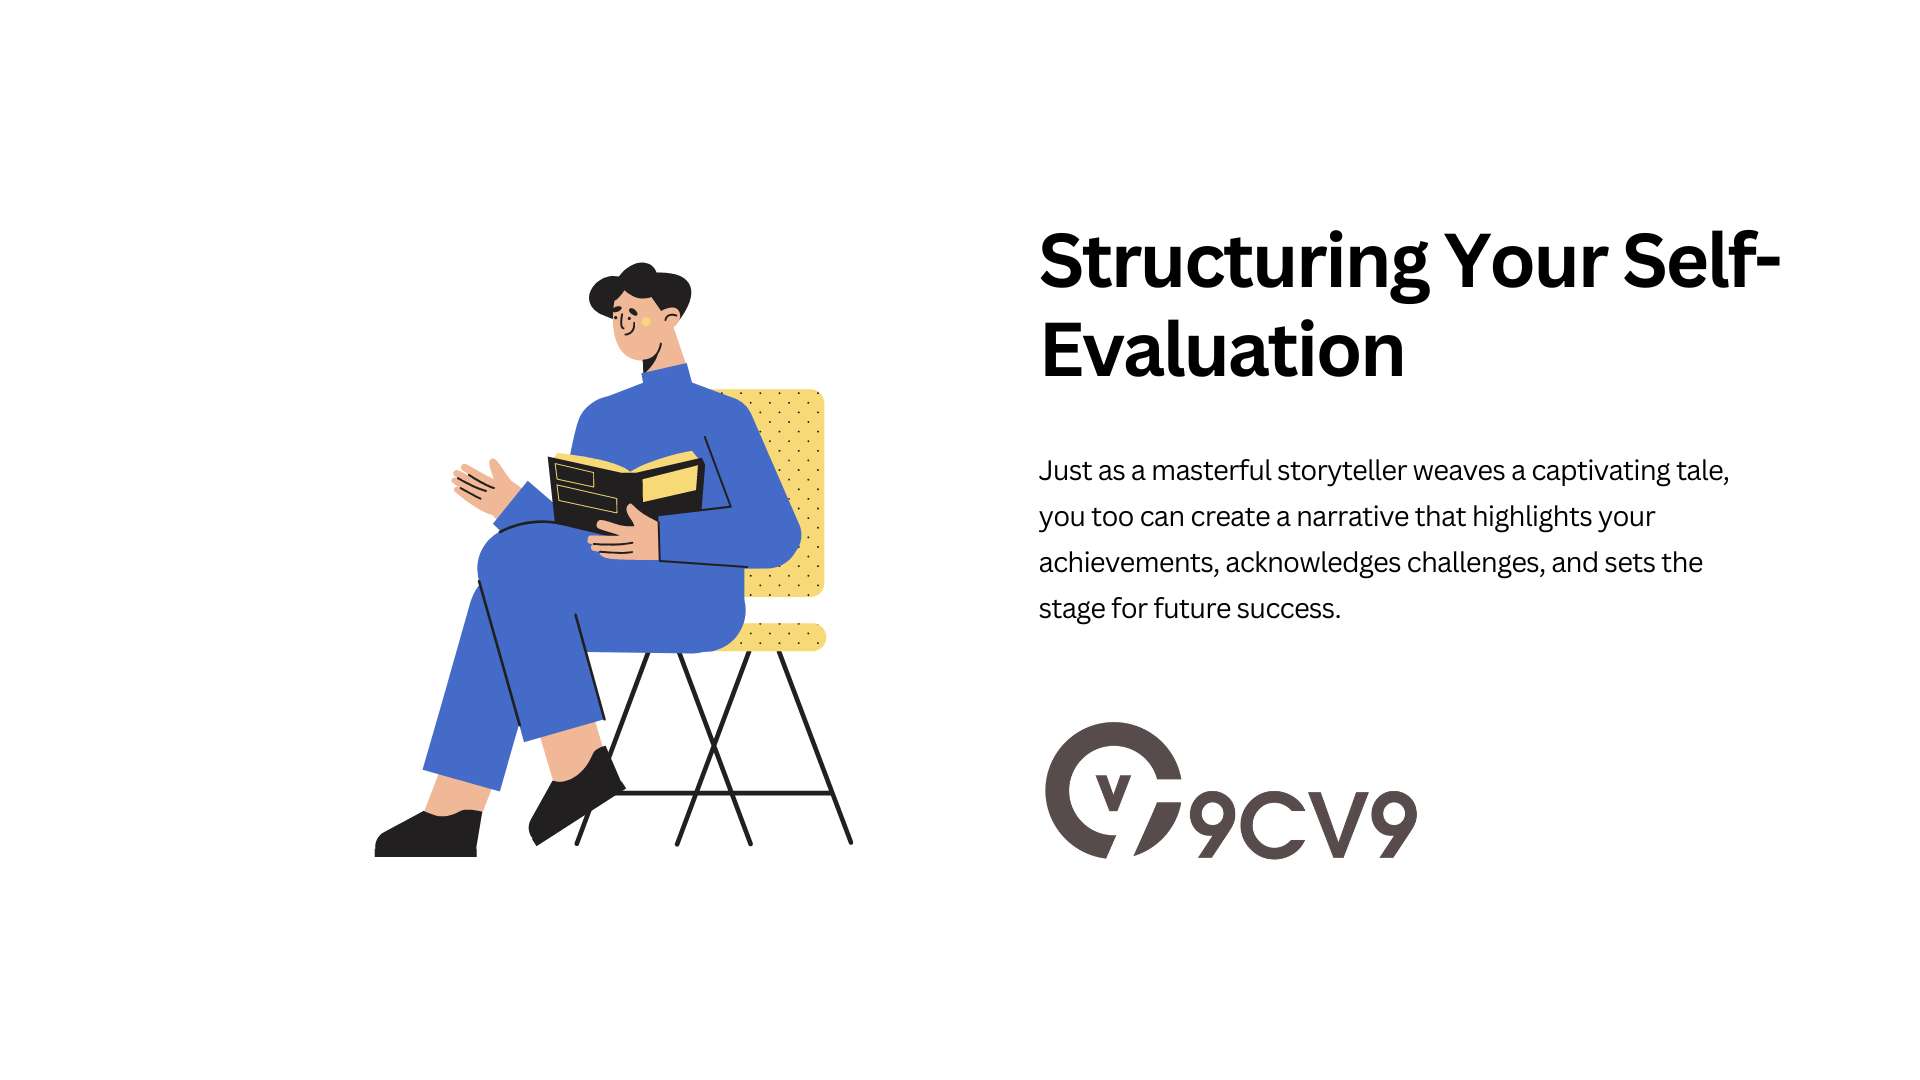 Structuring Your Self-Evaluation